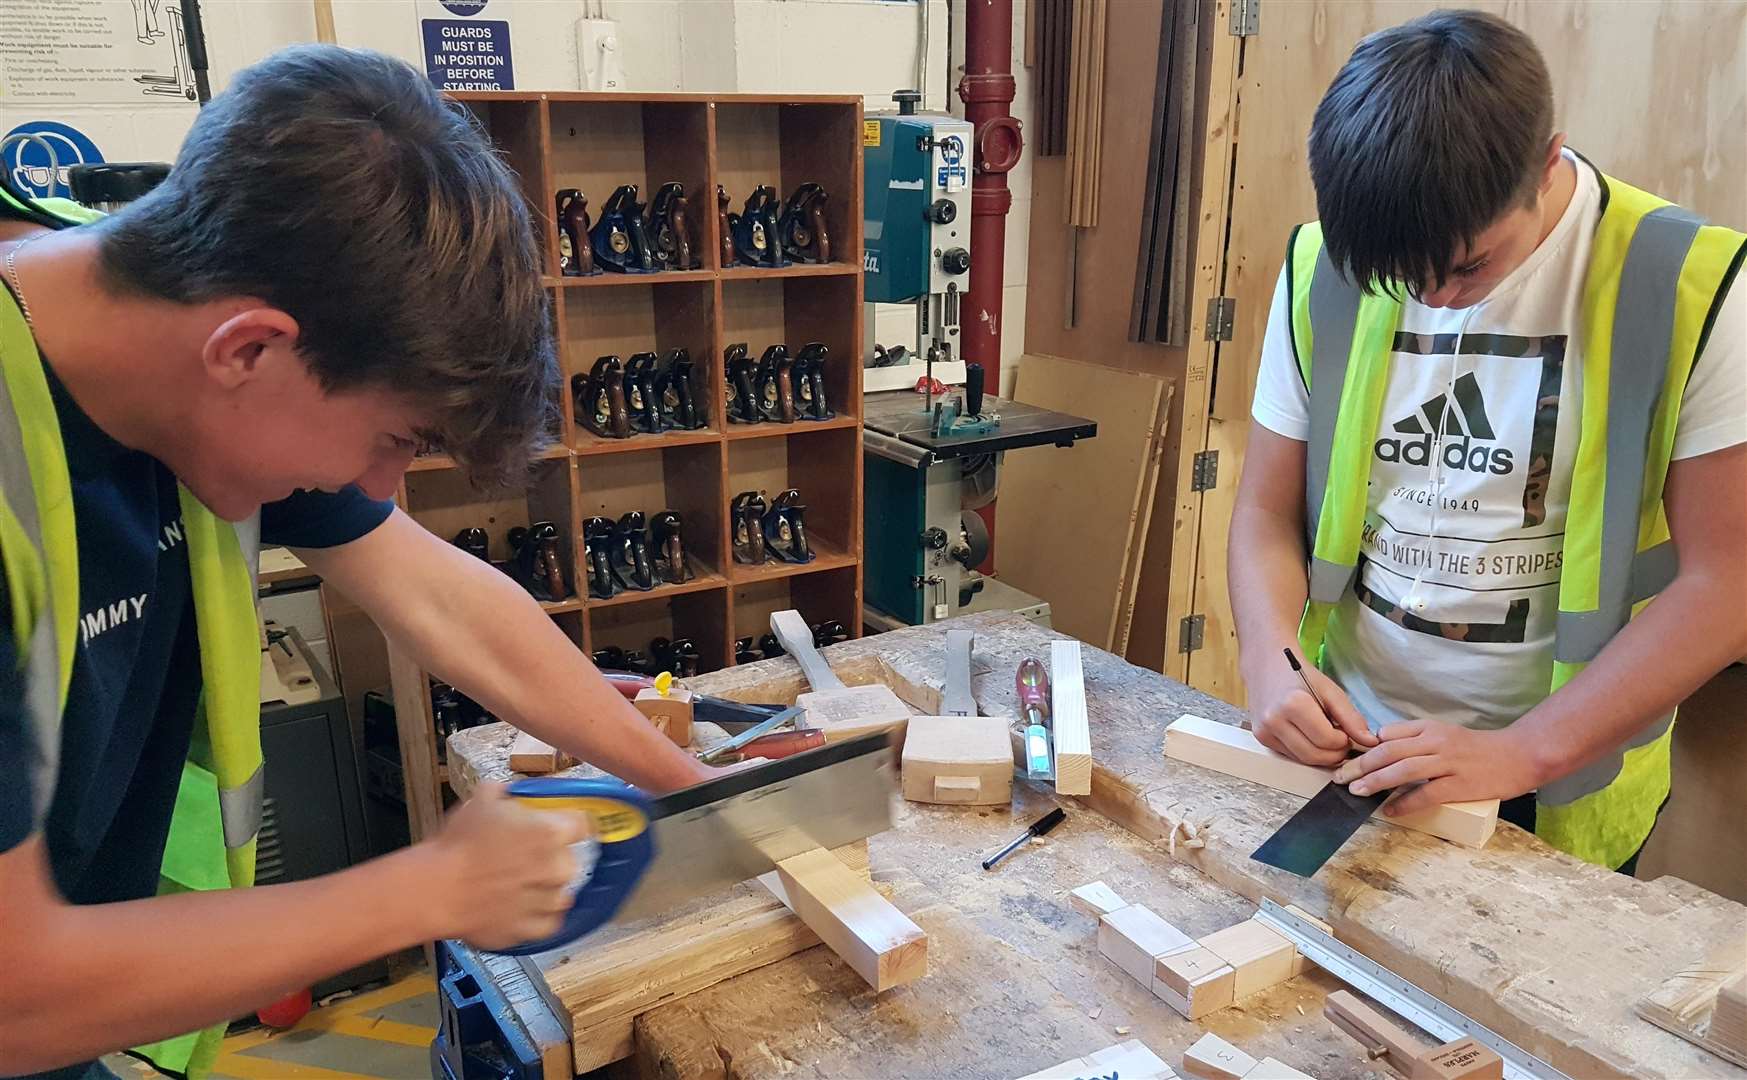 Tradespeople will be able to pass on their knowledge to students enrolling in courses like Carpentry and Joinery at Canterbury College